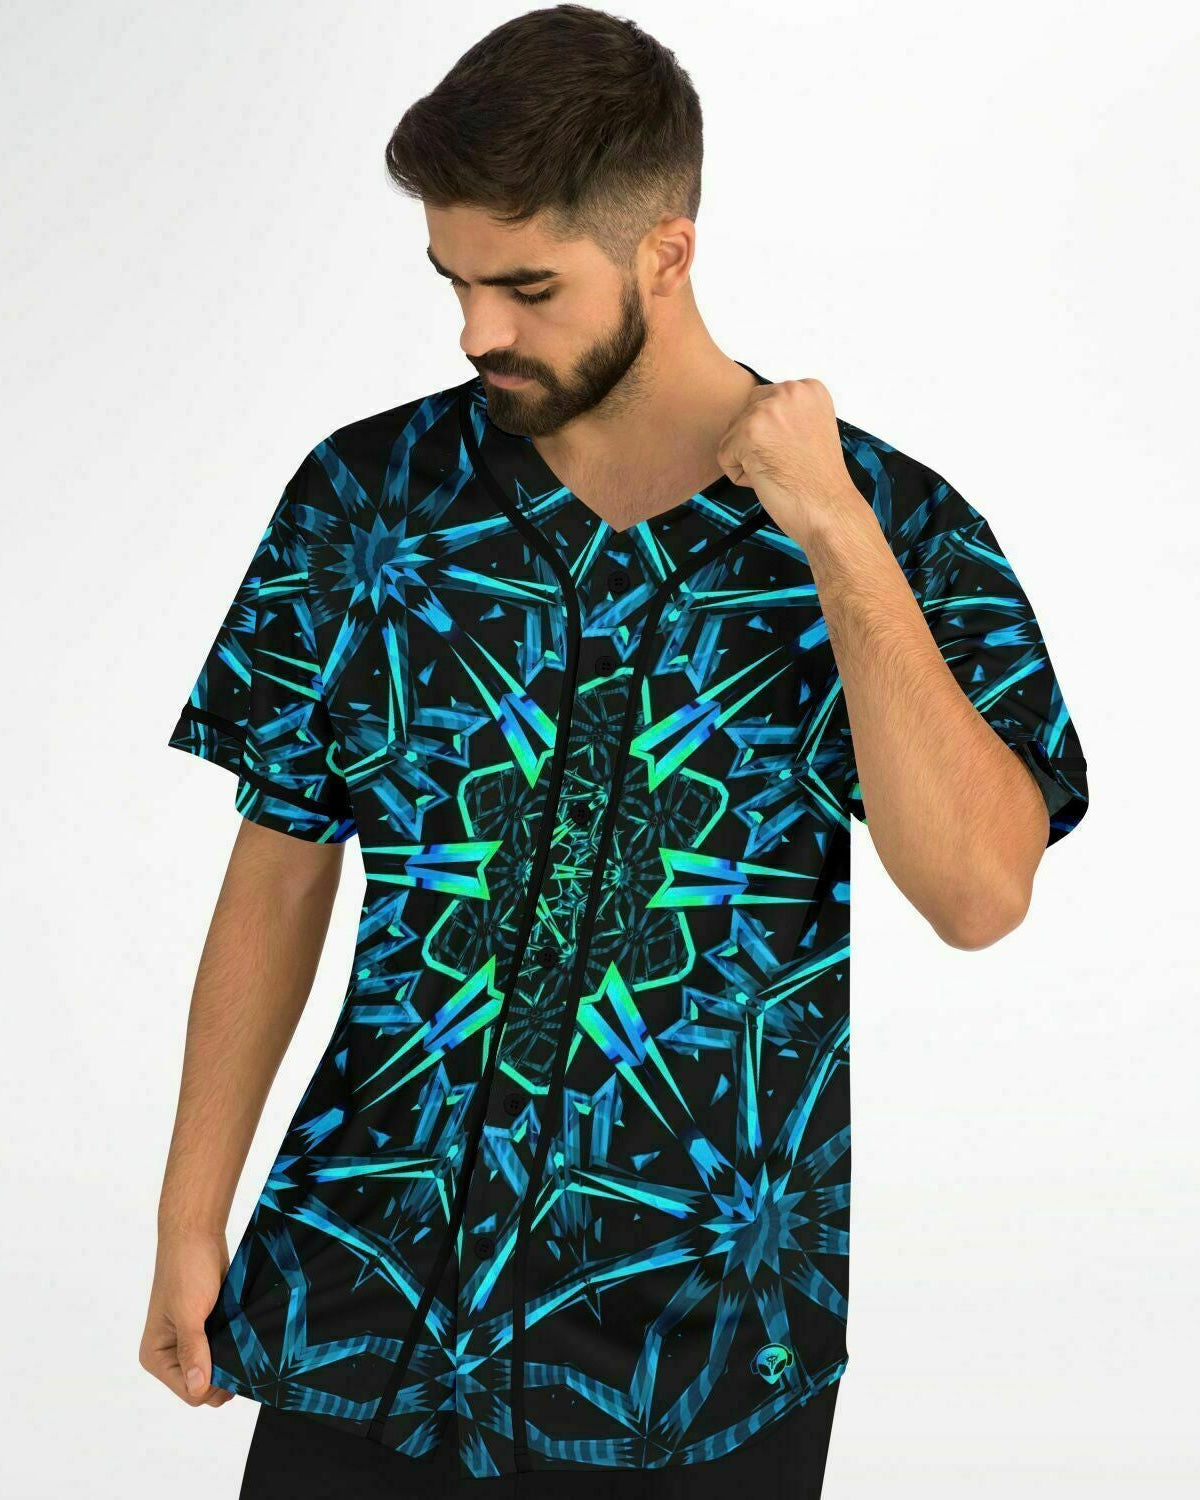 Male model showcasing the One Stop Rave Fractals Baseball Jersey